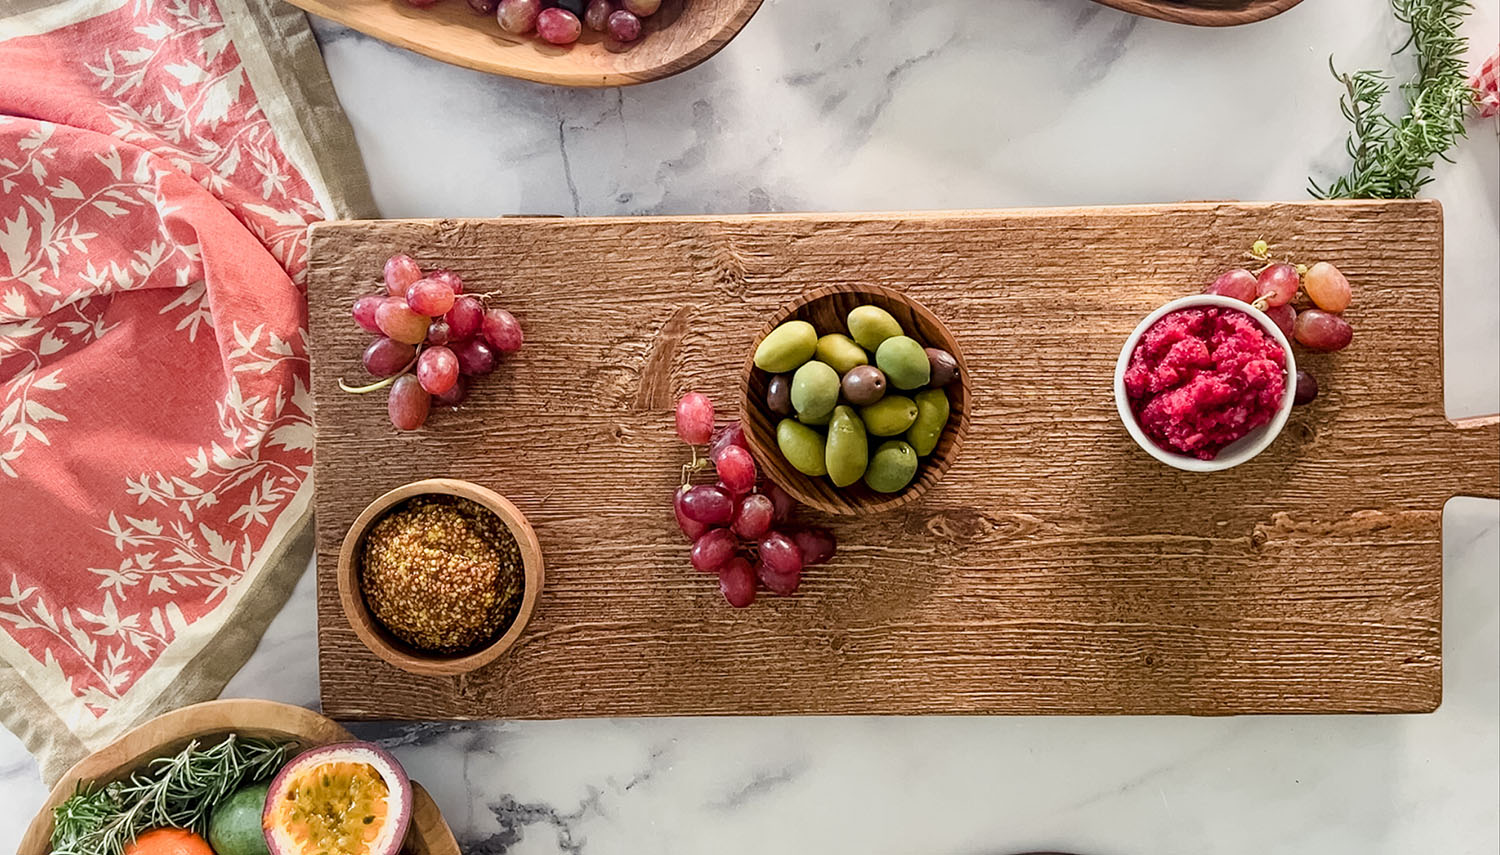 Wooden charcuterie board with olives, dips, and grapes